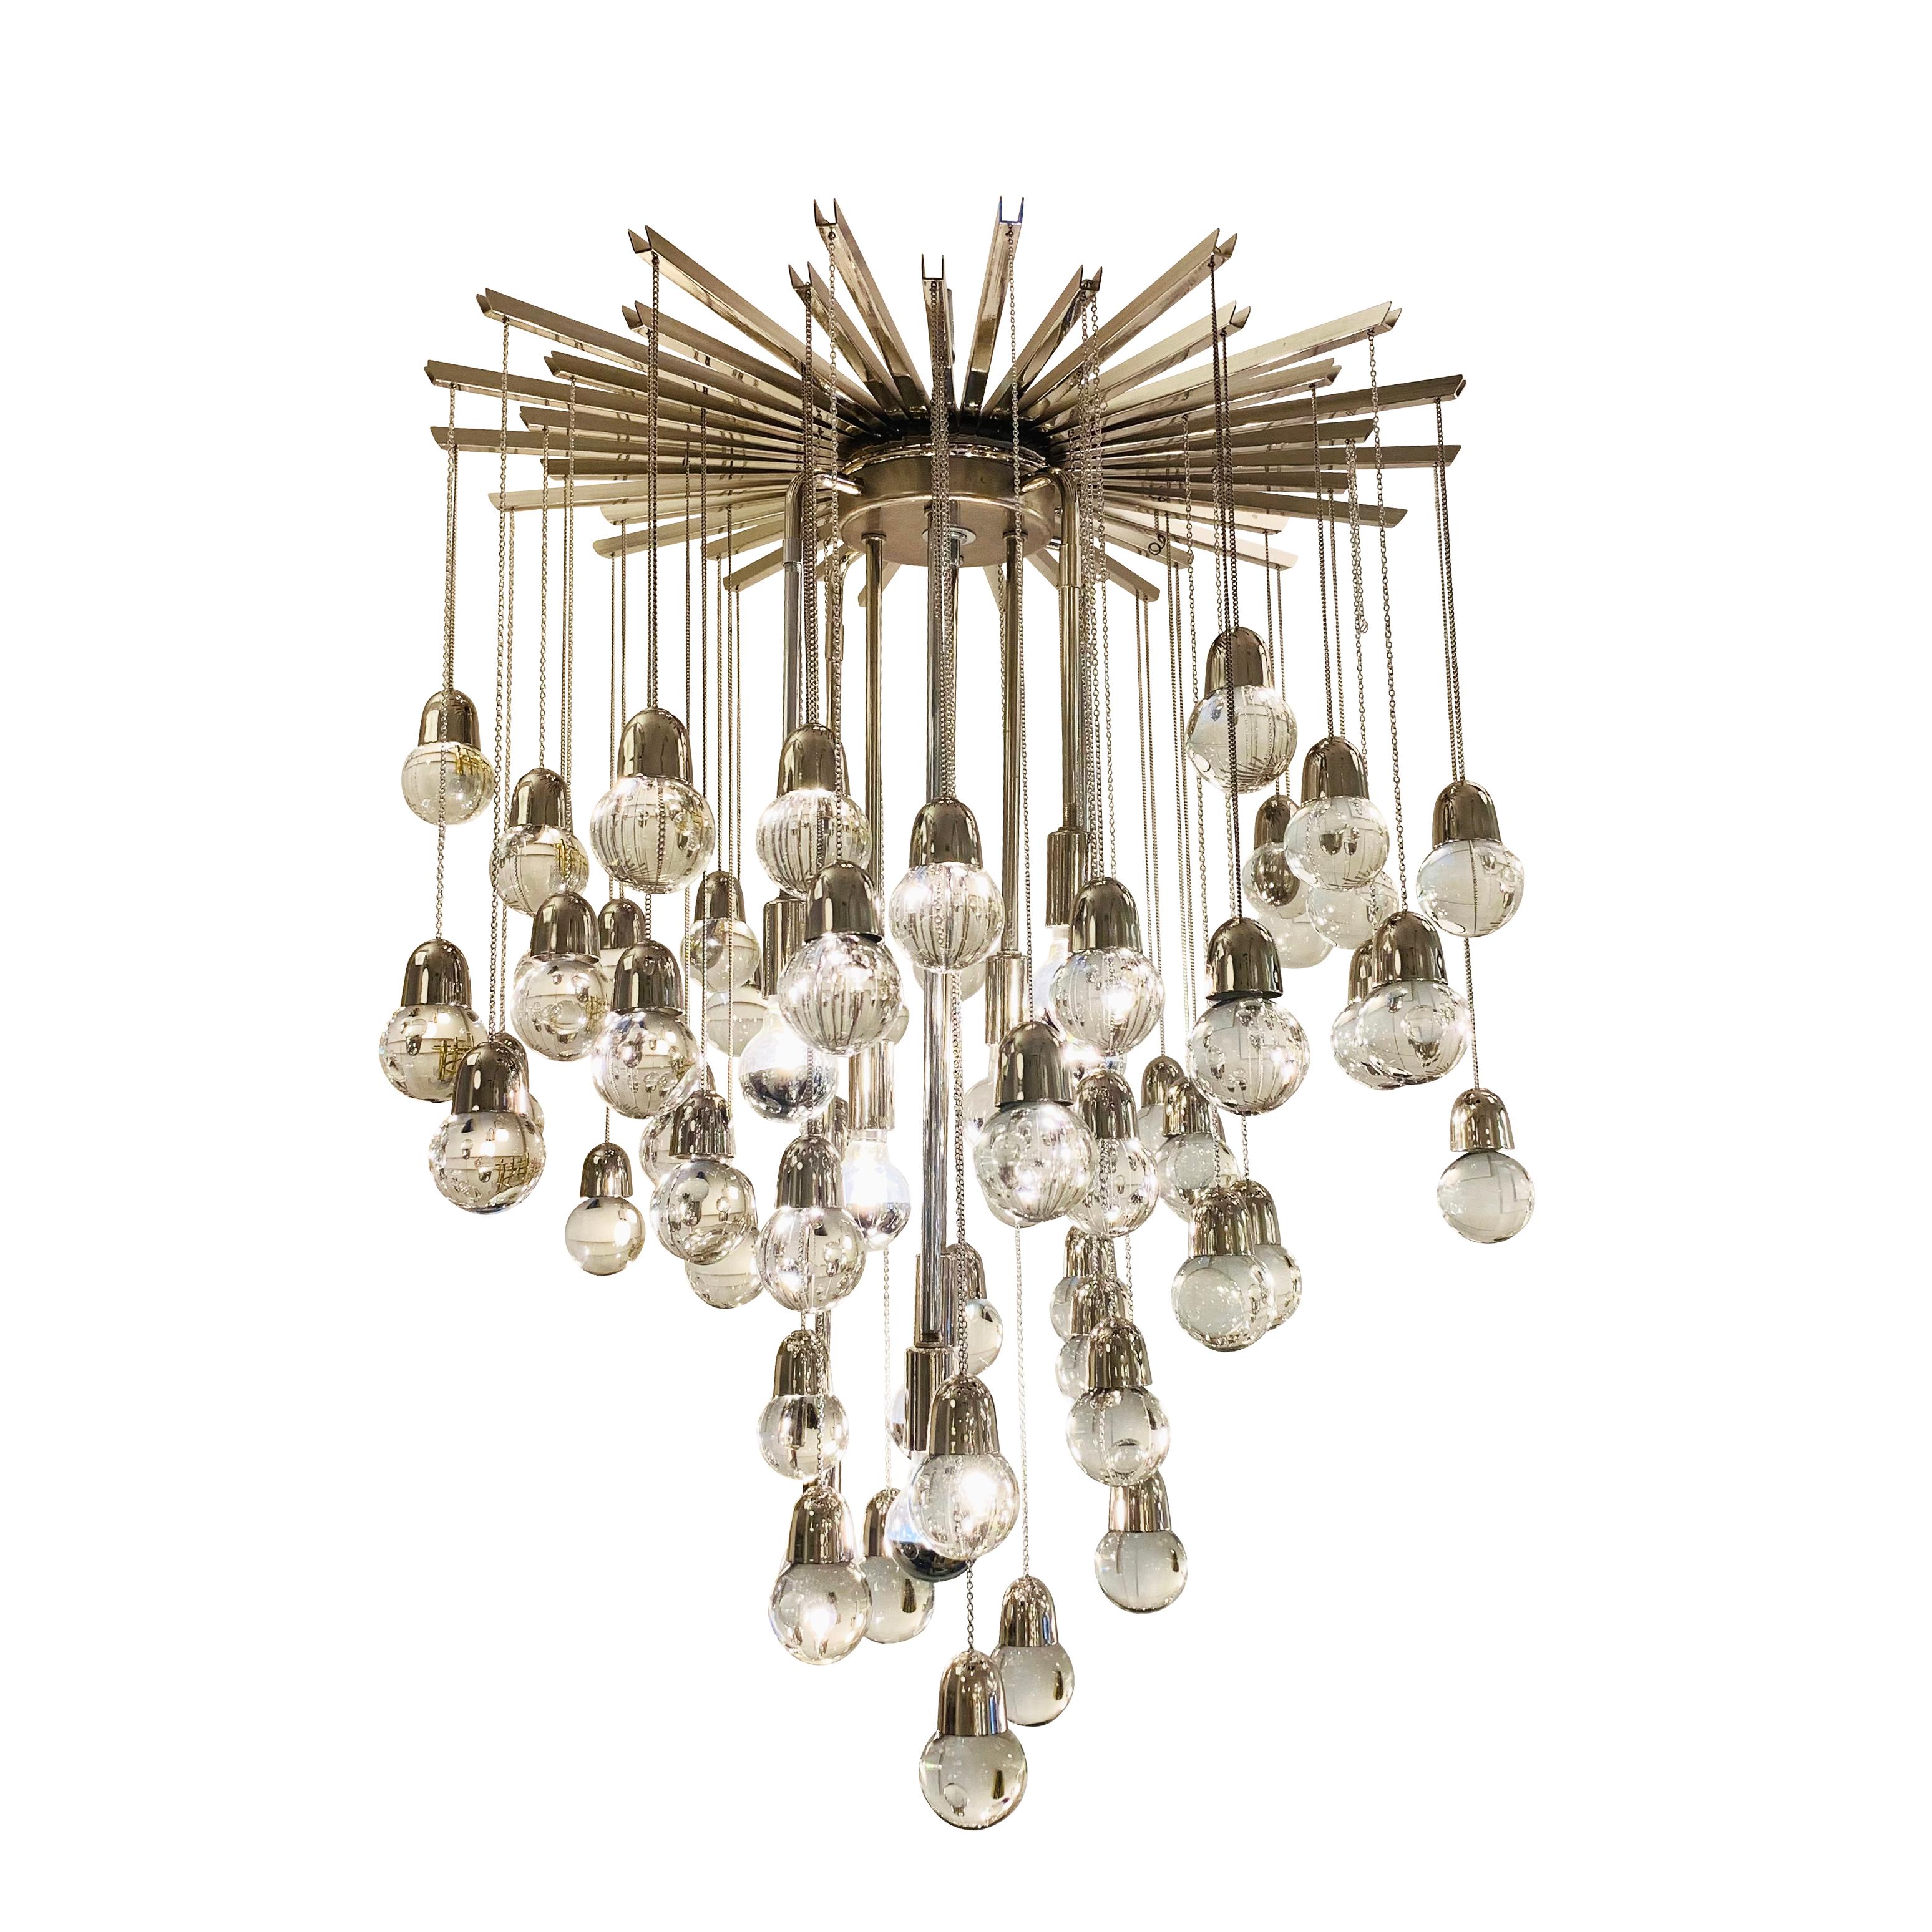 Eye-catching chandelier made with more than ninety glass spheres hanging from a star-shaped canopy. Nine stems with sockets come down from the star structure. Light bulbs are located at the same height of the spheres making them blend in.